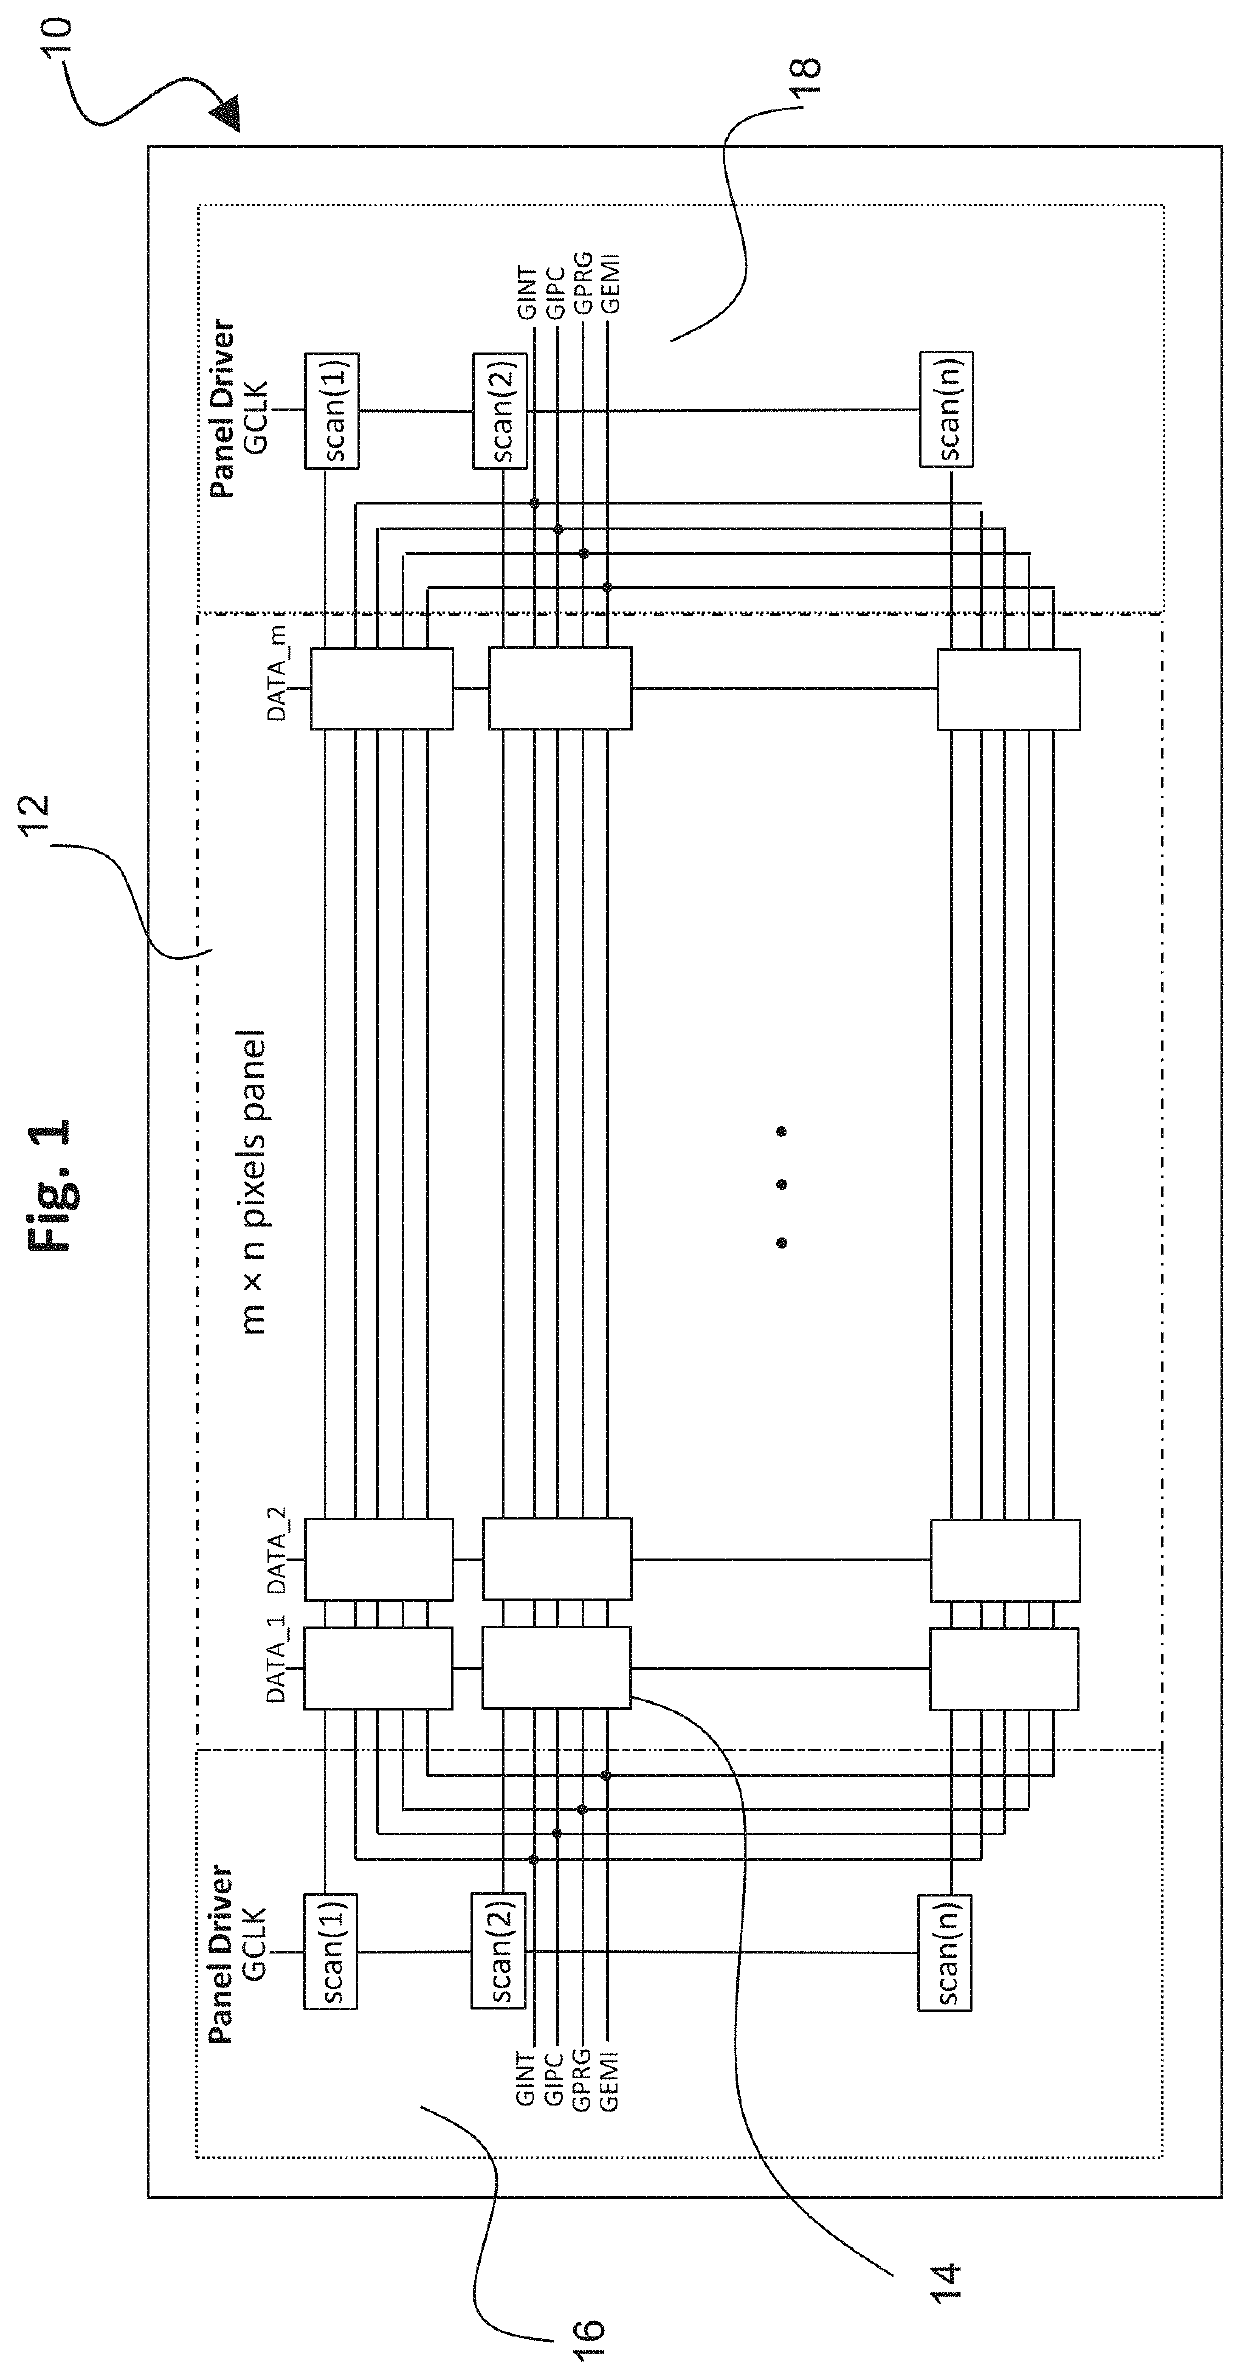 TFT pixel threshold voltage compensation circuit with global compensation